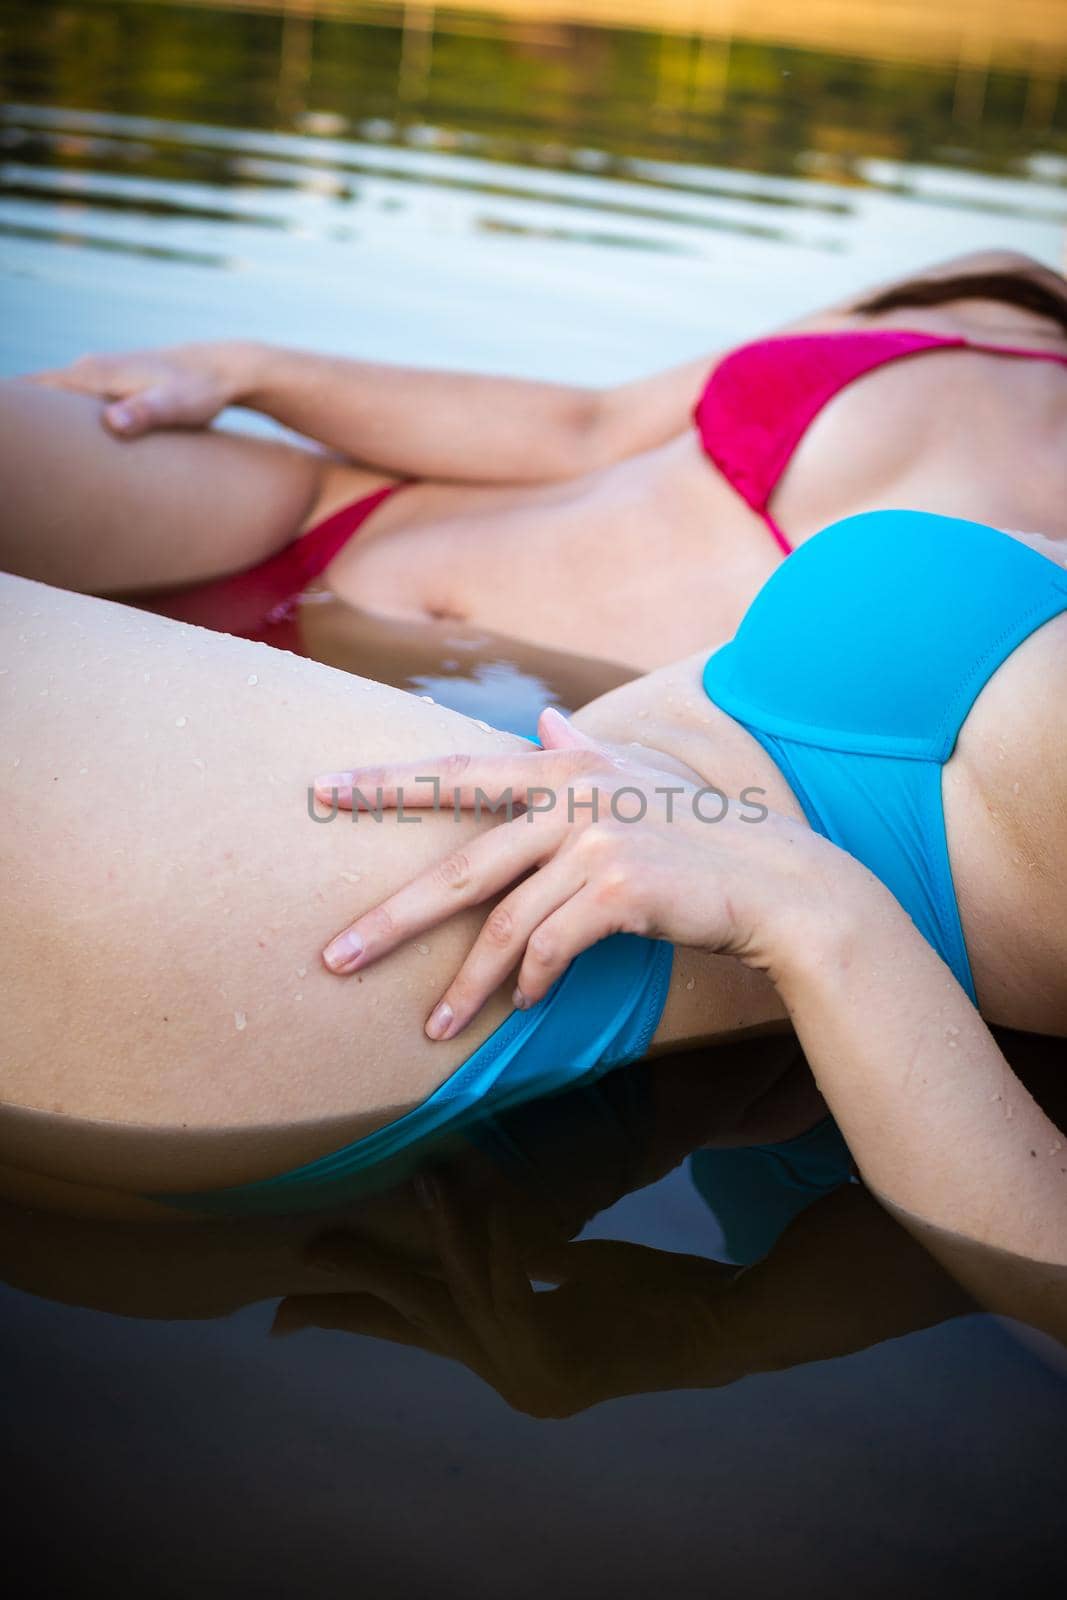 Rear view of two young women with beautiful bodies in bikinis. Blue and pink swimsuit in the water.